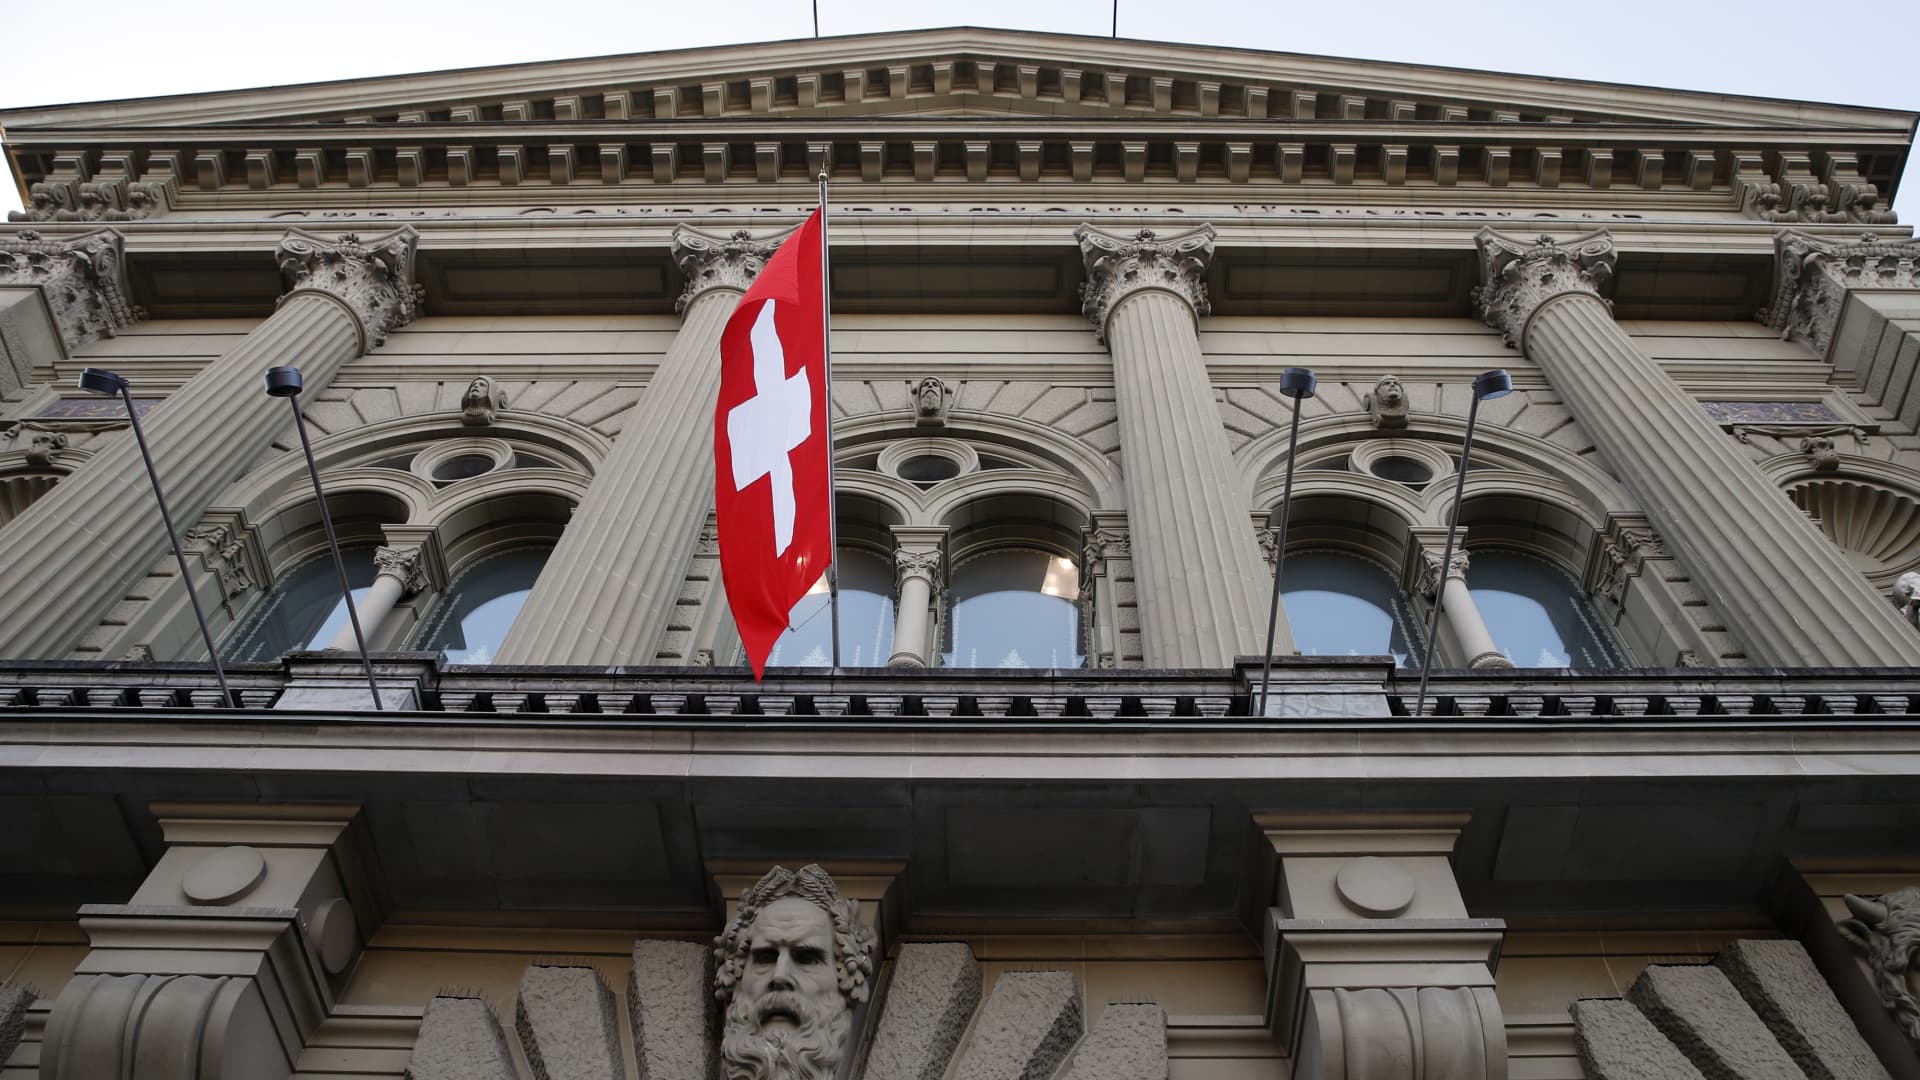 Swiss central bank hikes interest rates by 50 basis points despite Credit Suisse turmoil – NewsEverything Business